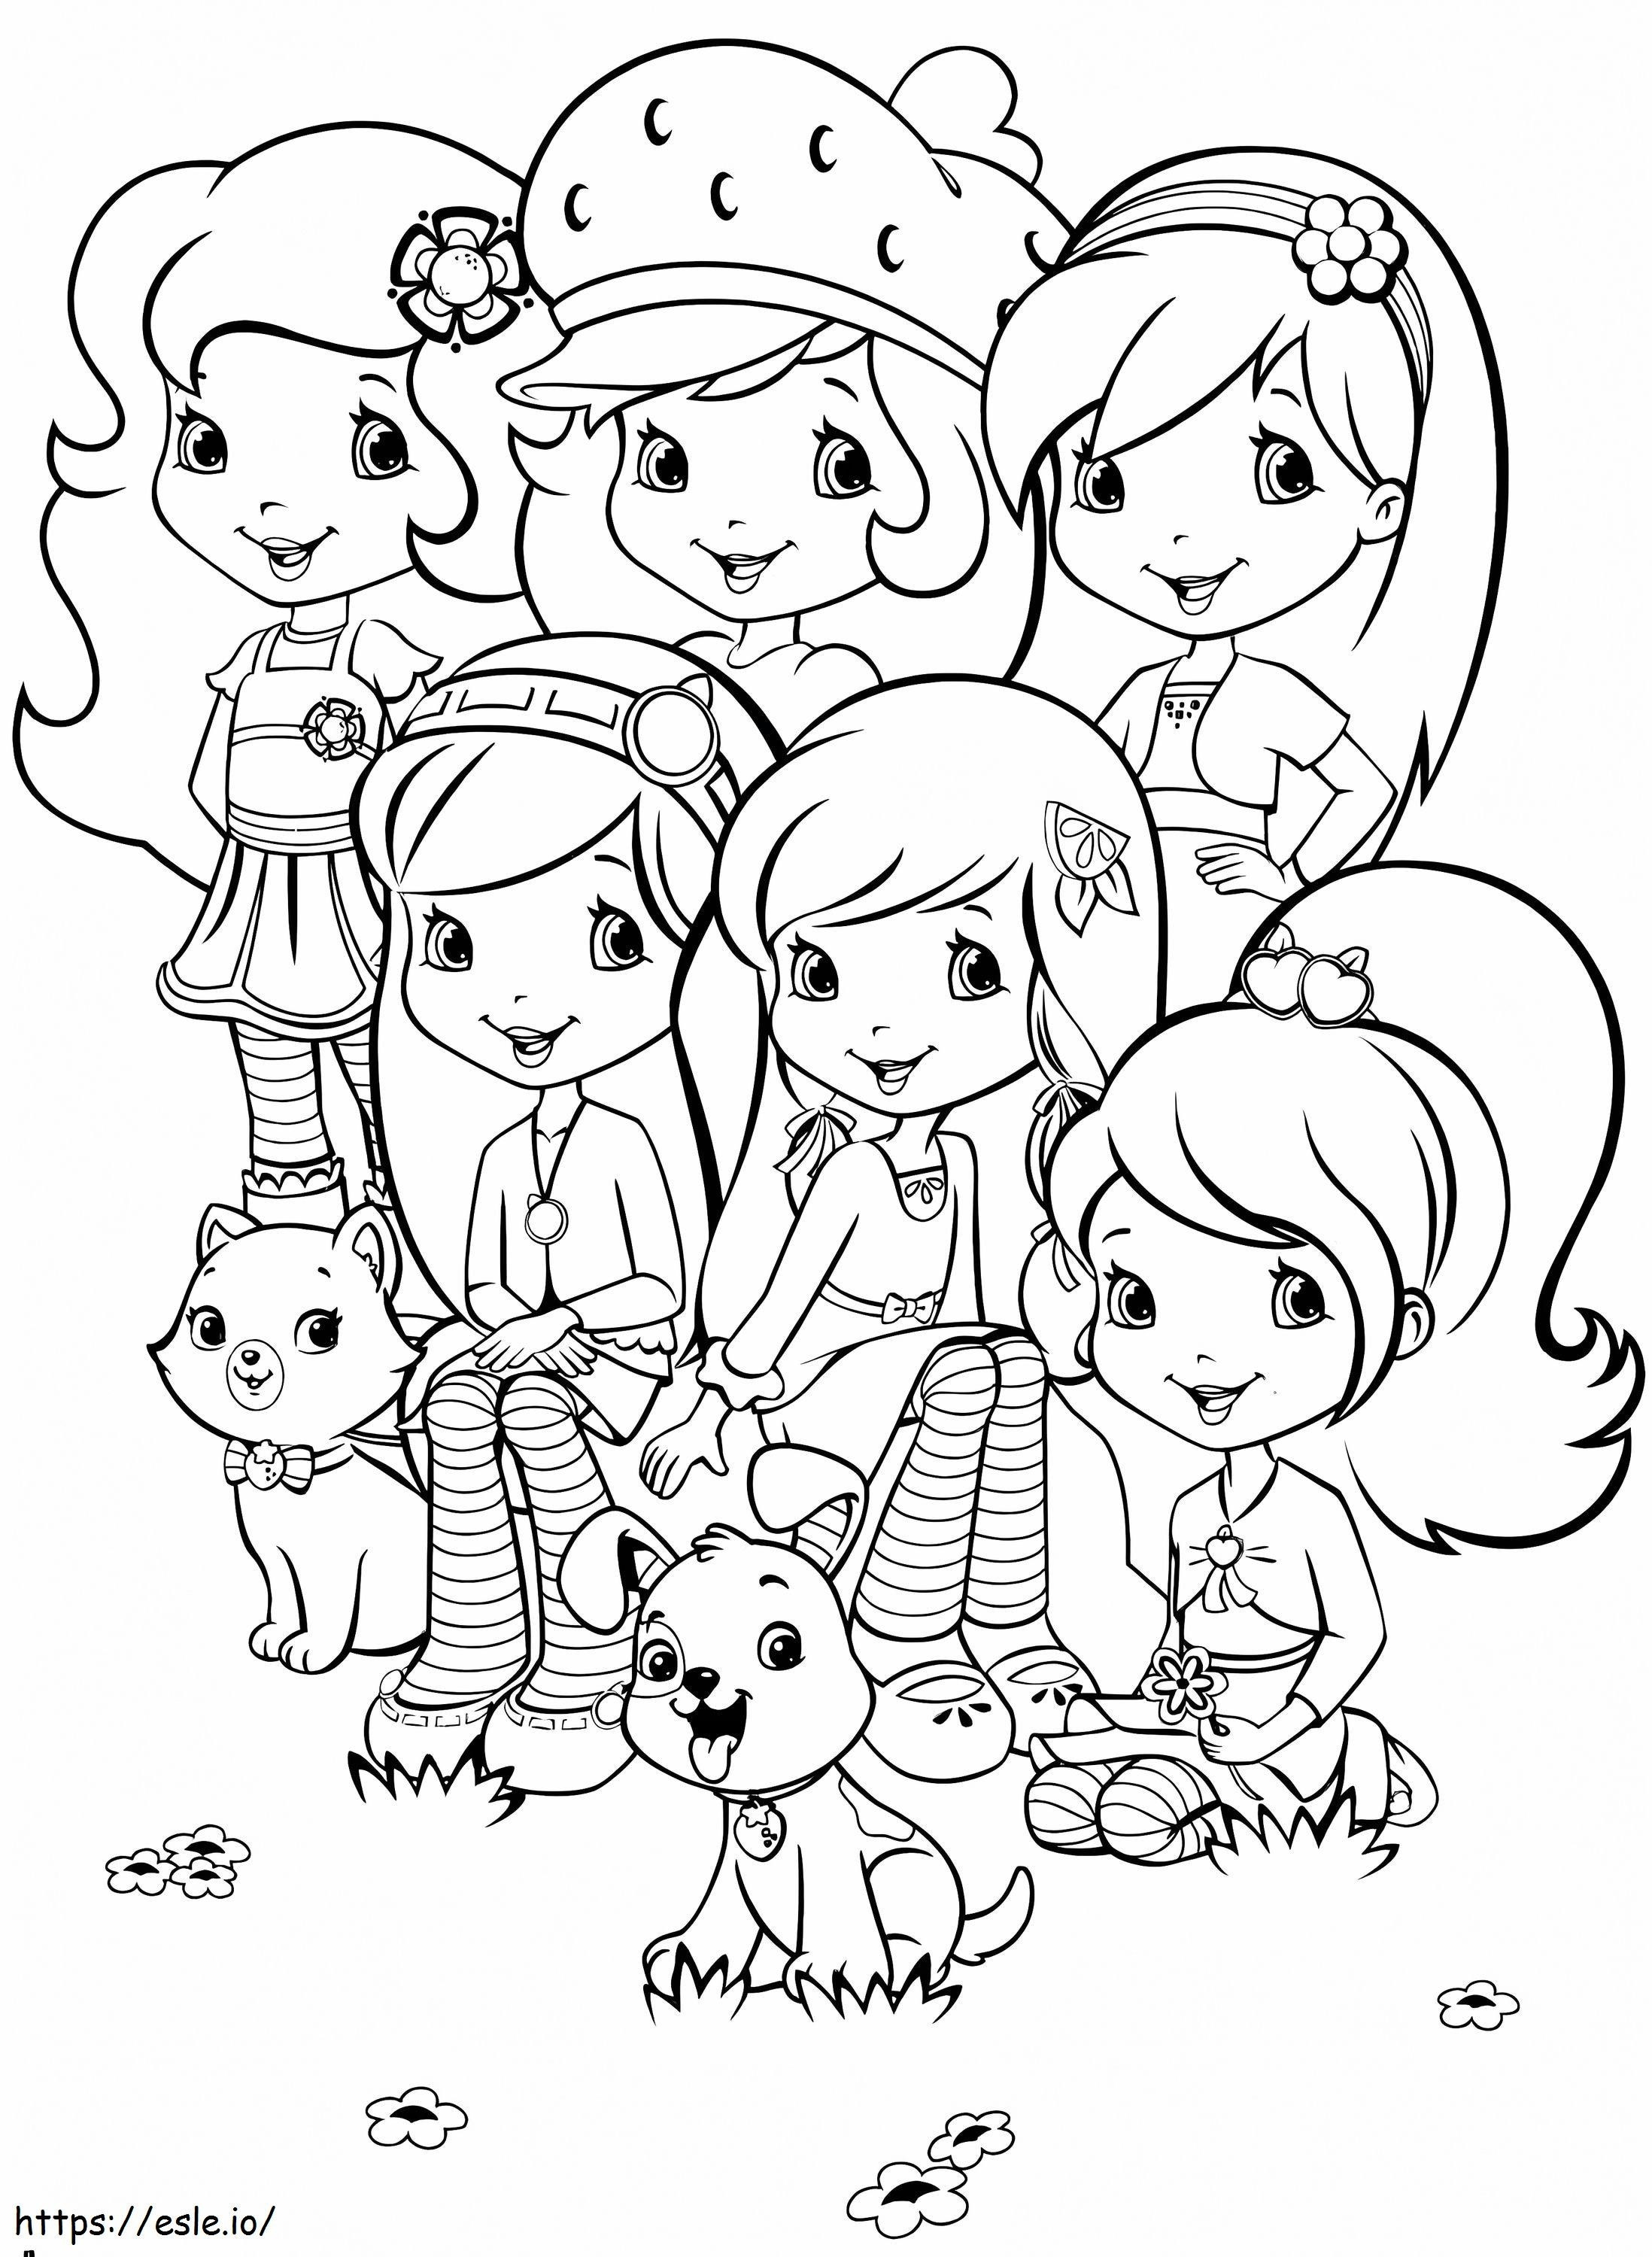 Strawberry Shortcake And Friends coloring page